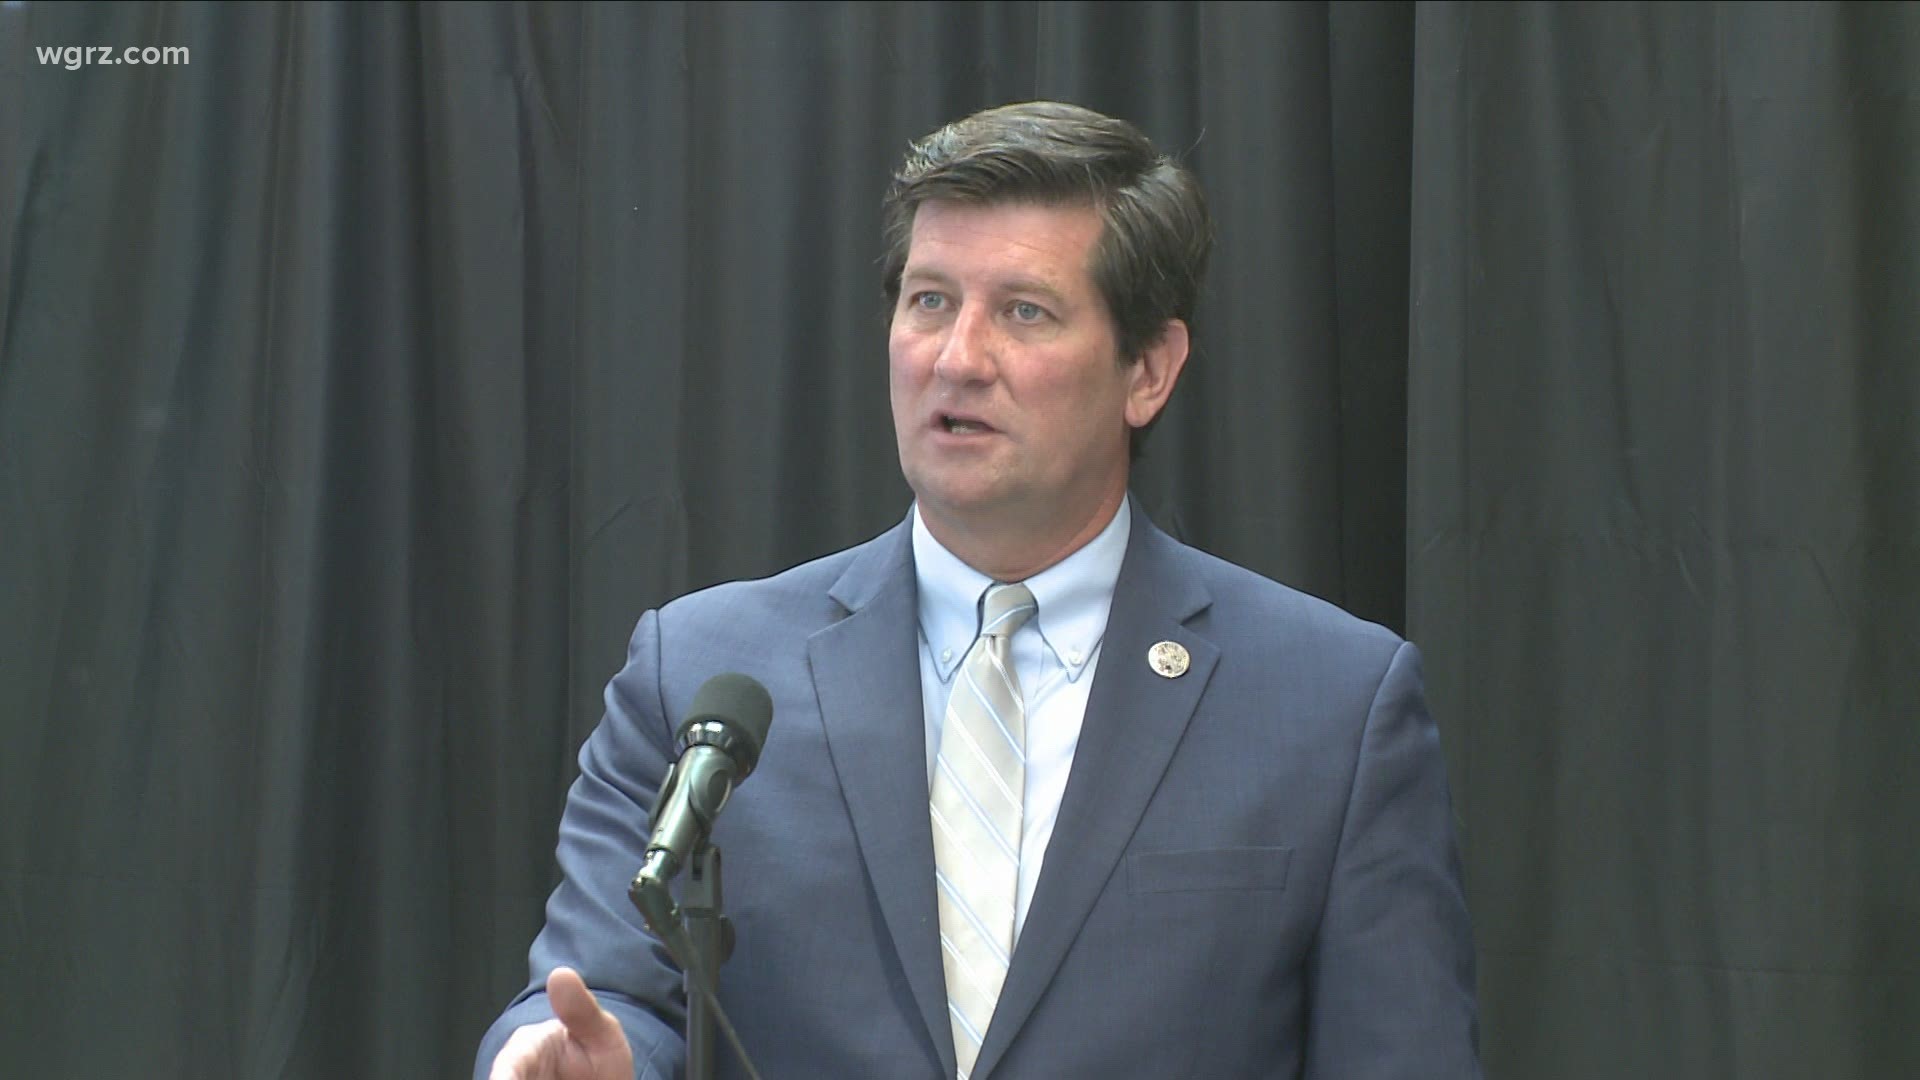 Poloncarz plan to spend federal relief money